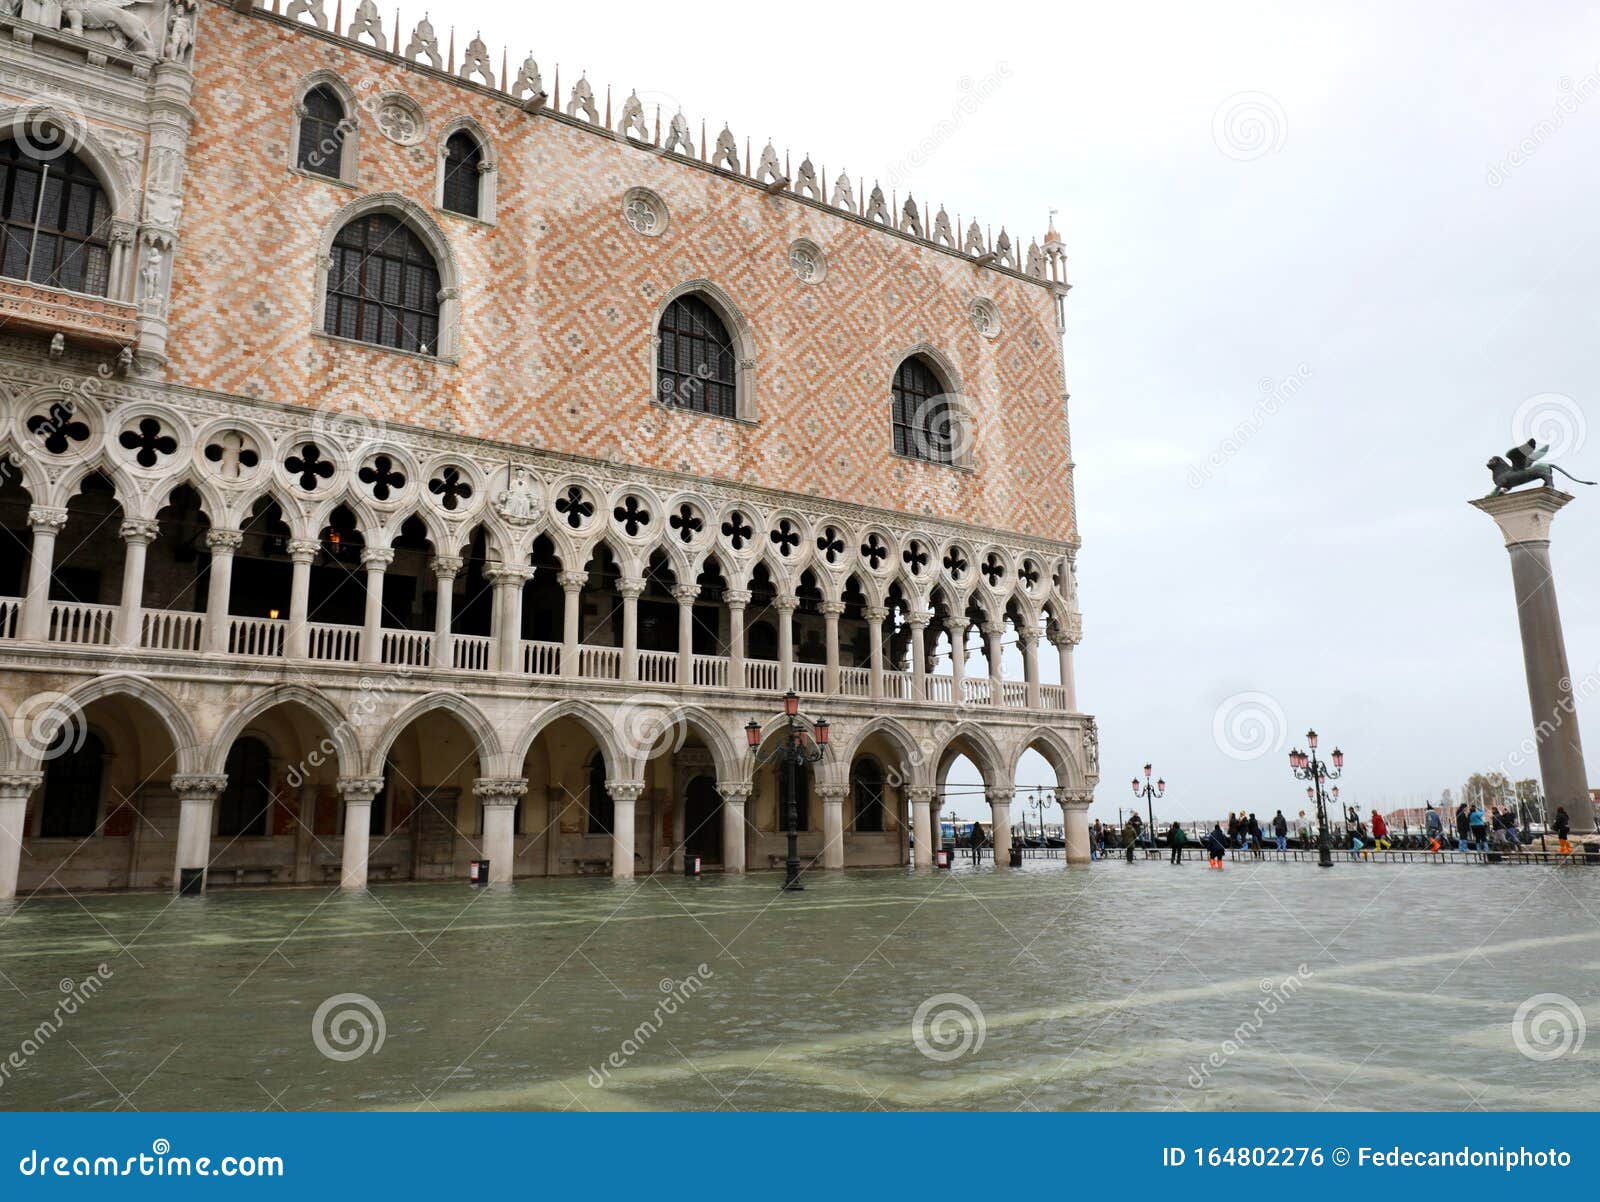 ducal palace called palazzo ducal in italian langauge during the